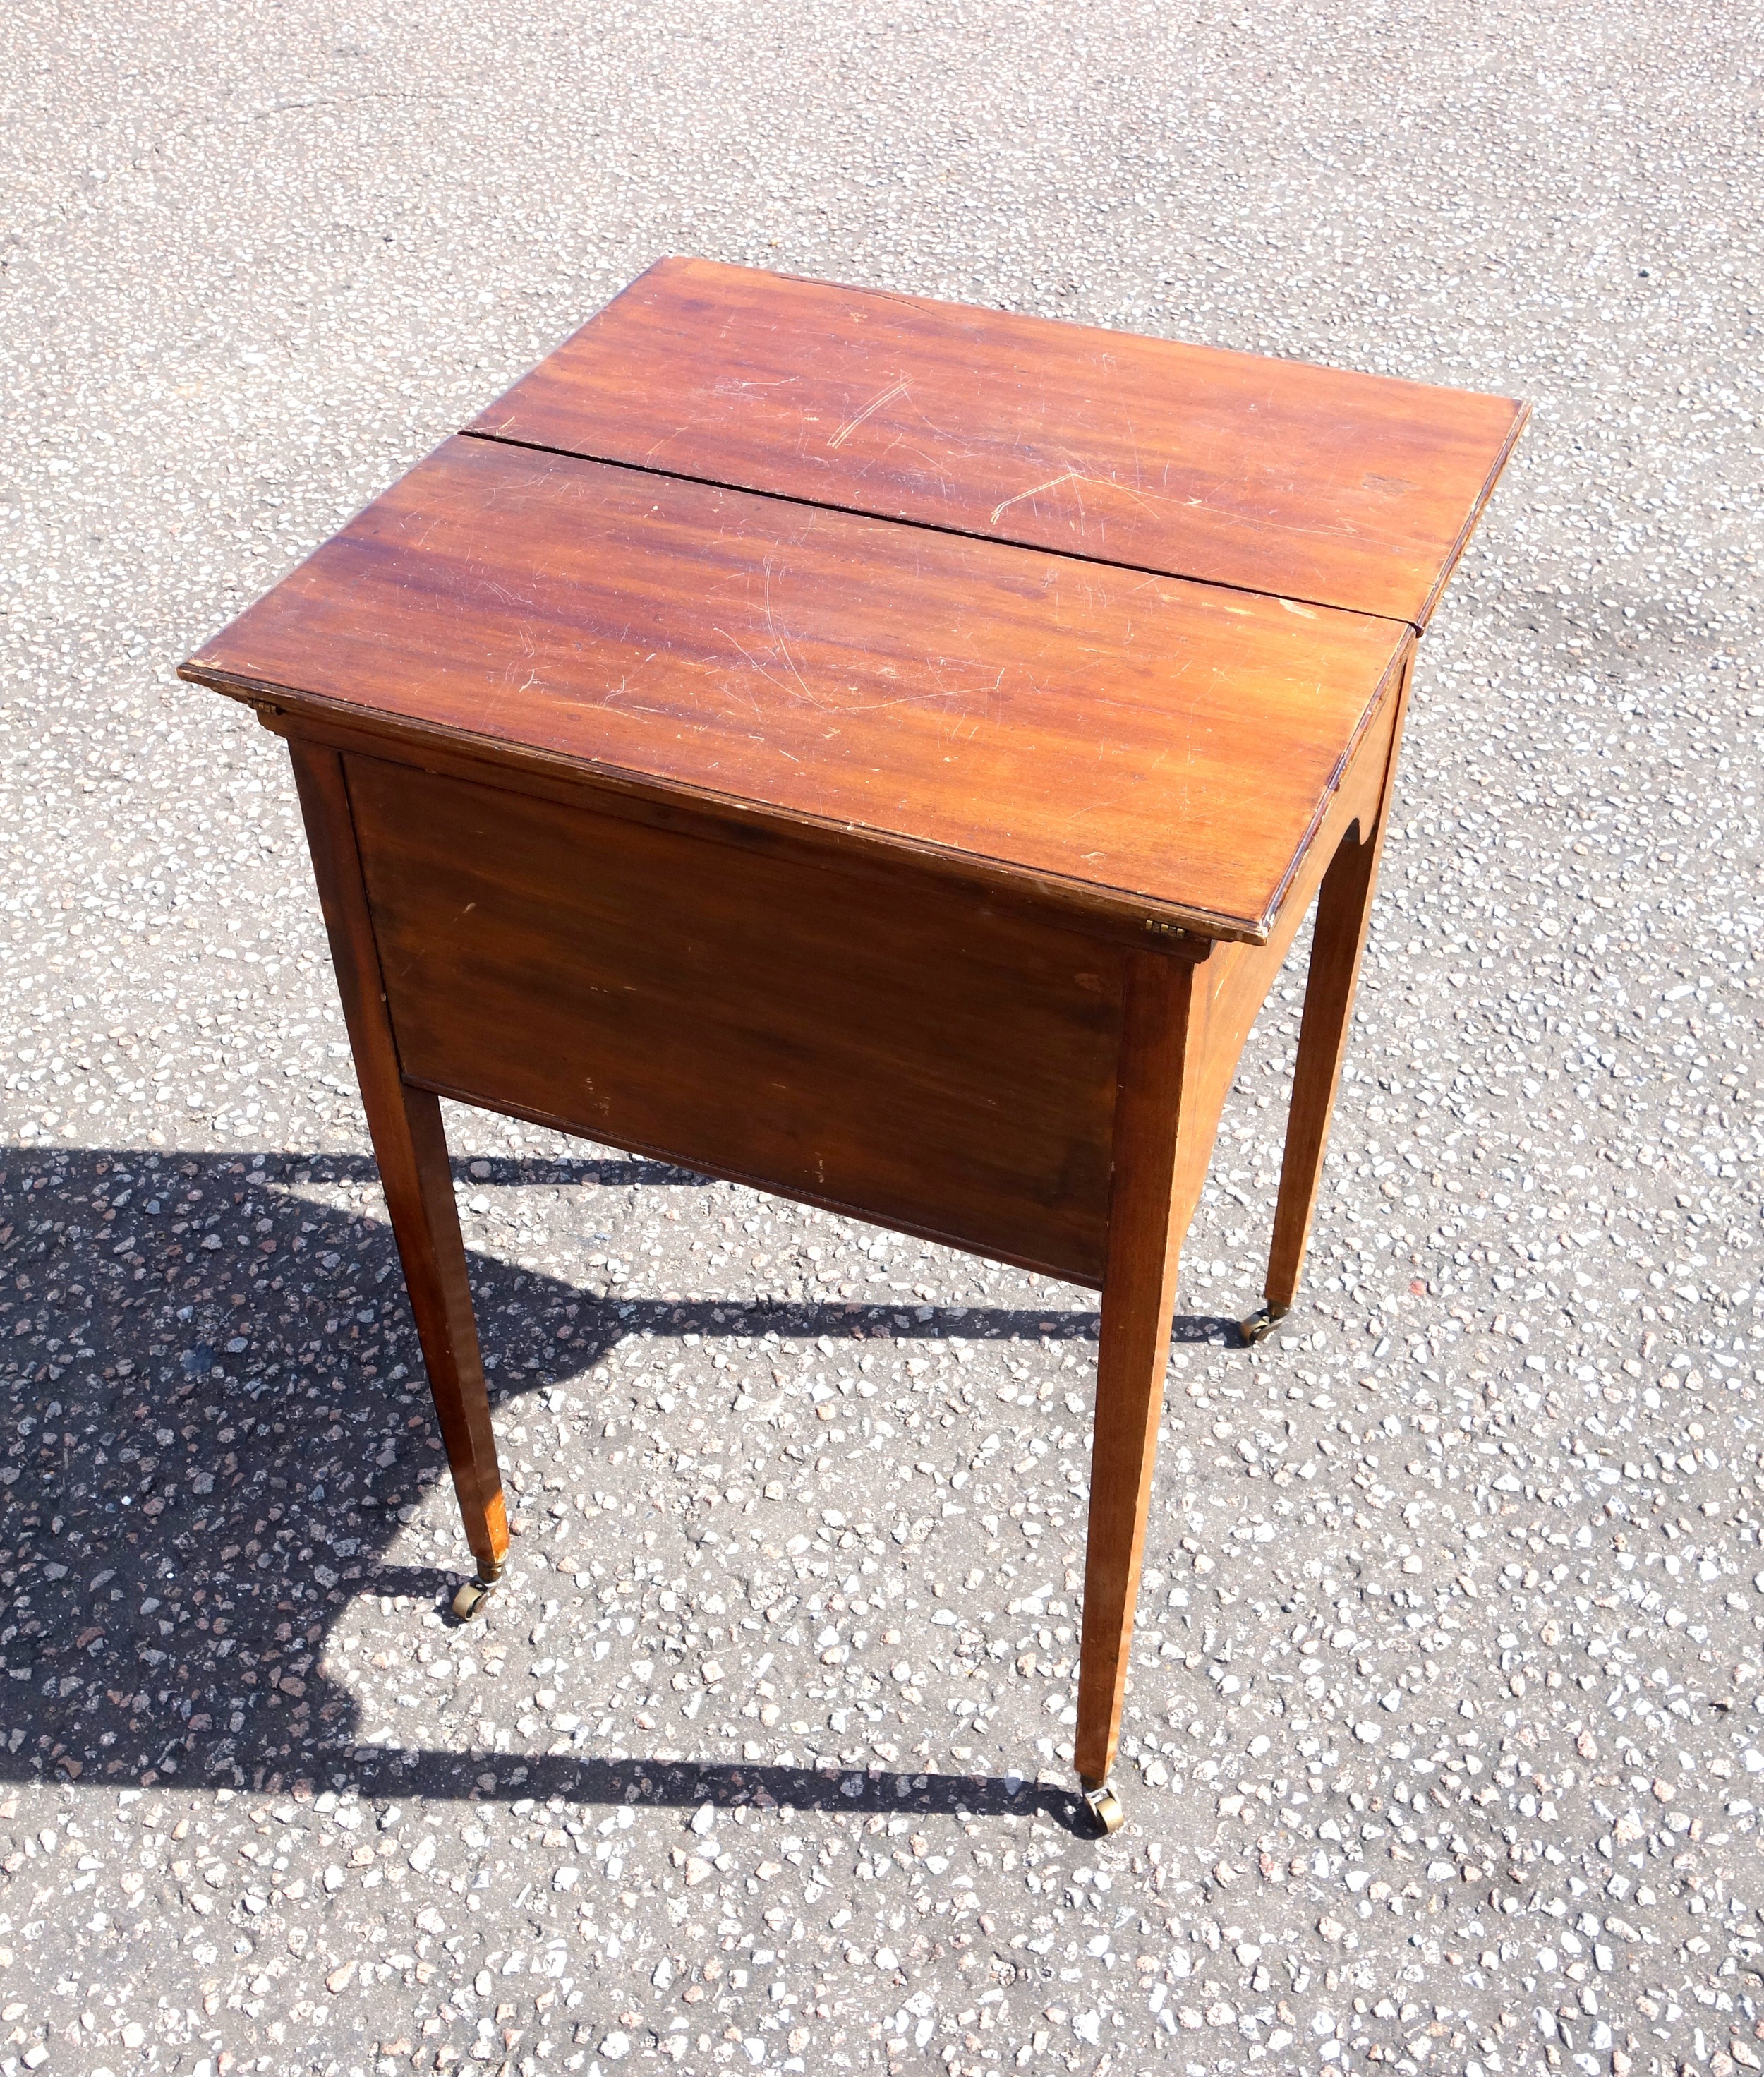 Edwardian Scottish mahogany writing table with a double hinged top raising a slope with pen tray, - Image 3 of 7